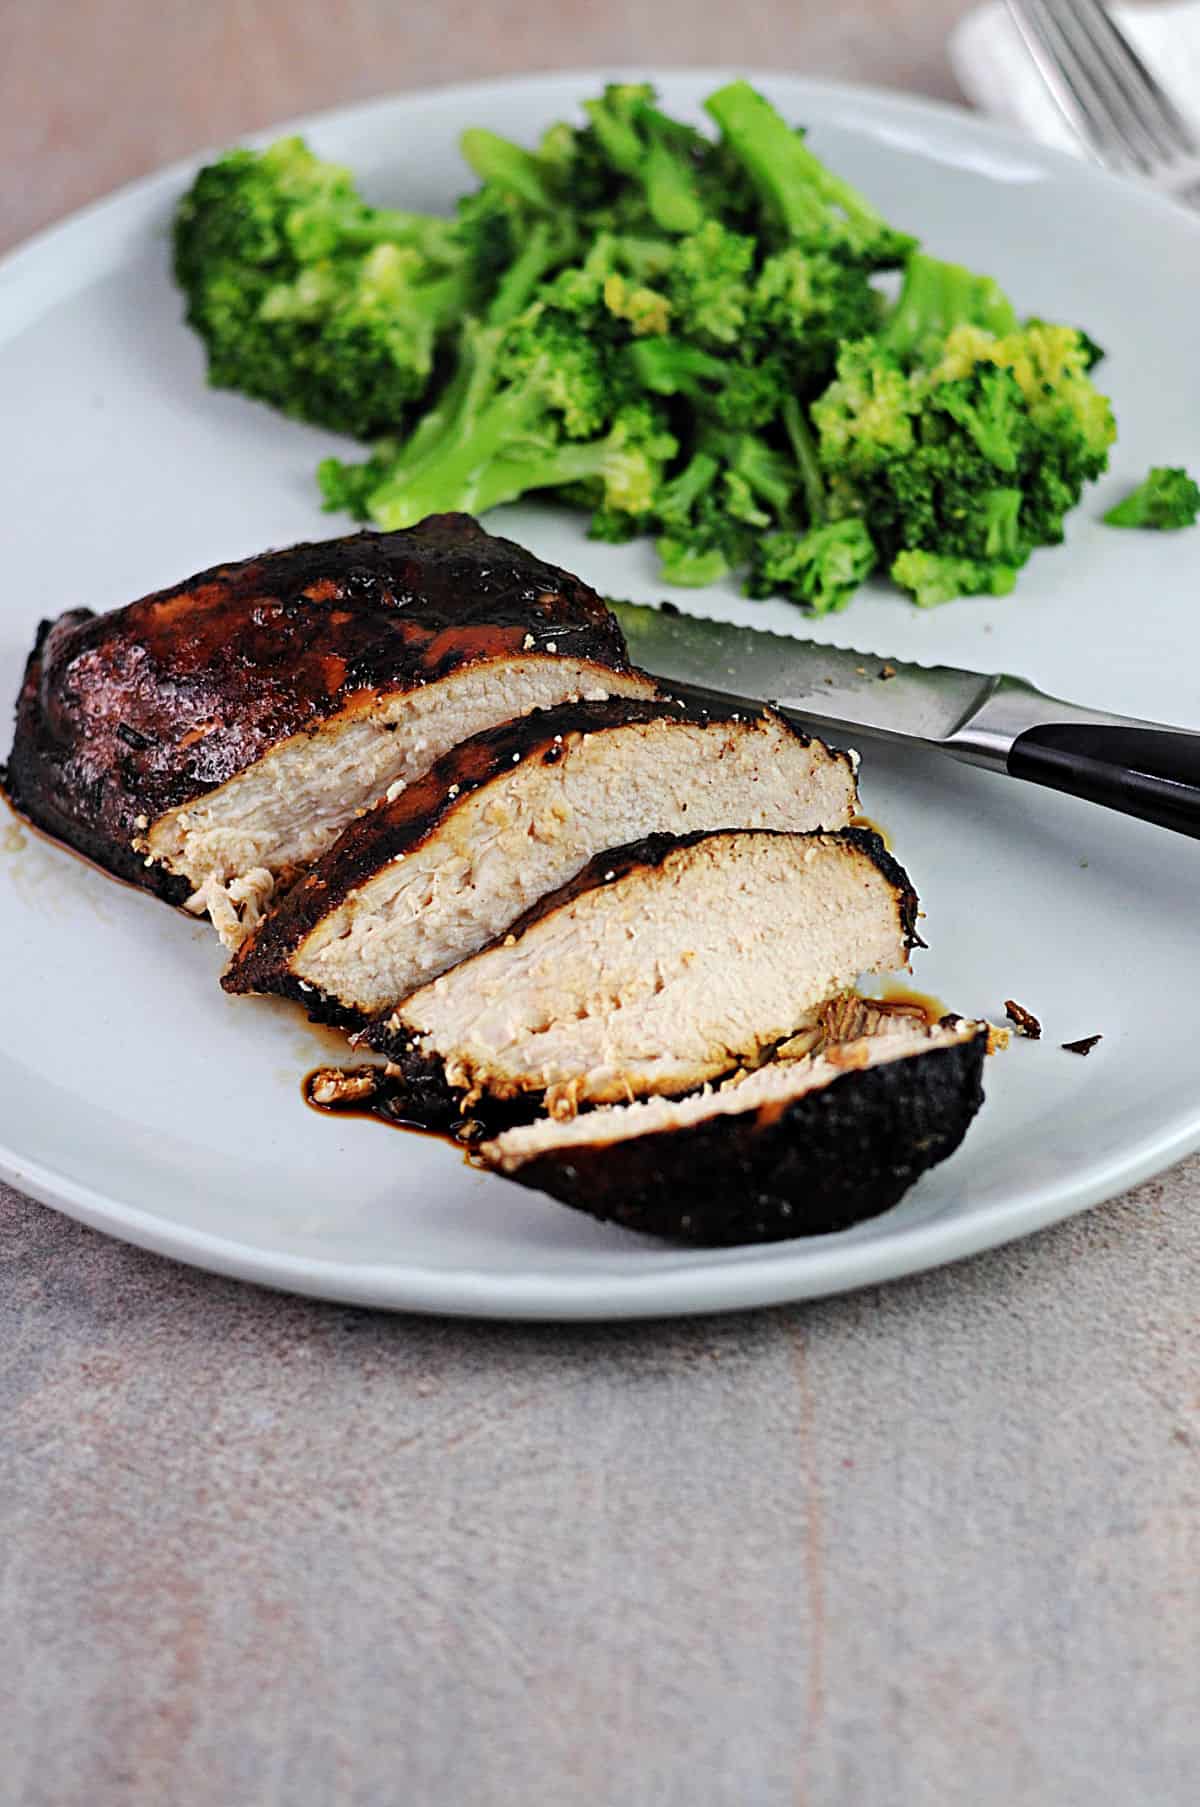 balsamic rosemary chicken breast sliced on a plate with some broccoli.